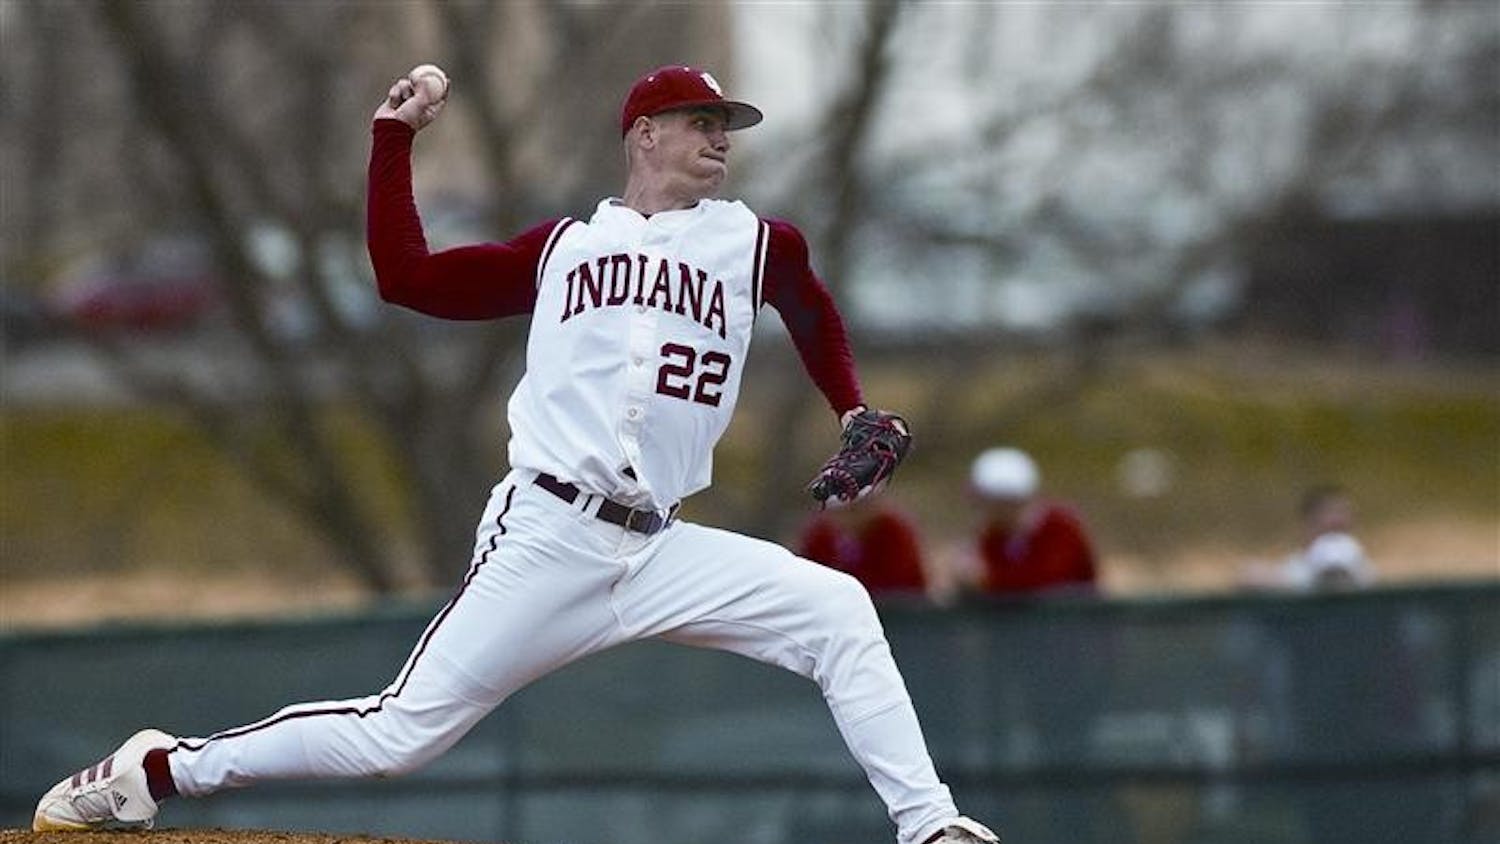 Junior pitcher Eric Arnett releases a throw during the third inning of a game against Xaver March 26, 2008 at Sembower field. The Hoosiers came from behind to win the game 10-4.